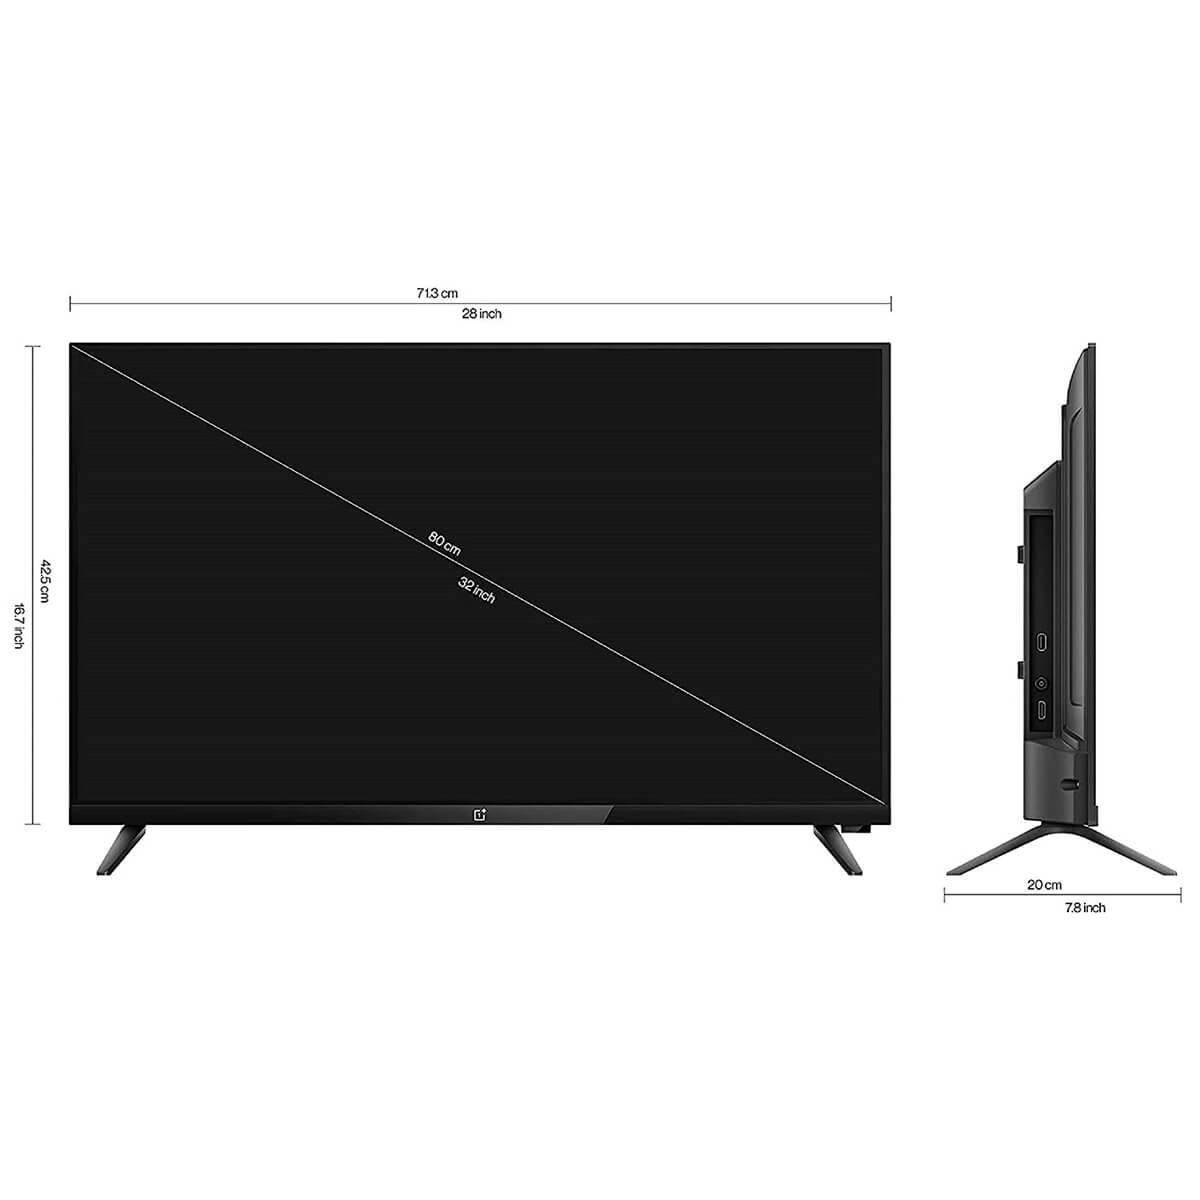 Black 32inch Real One Android Smart LED TV, IPS